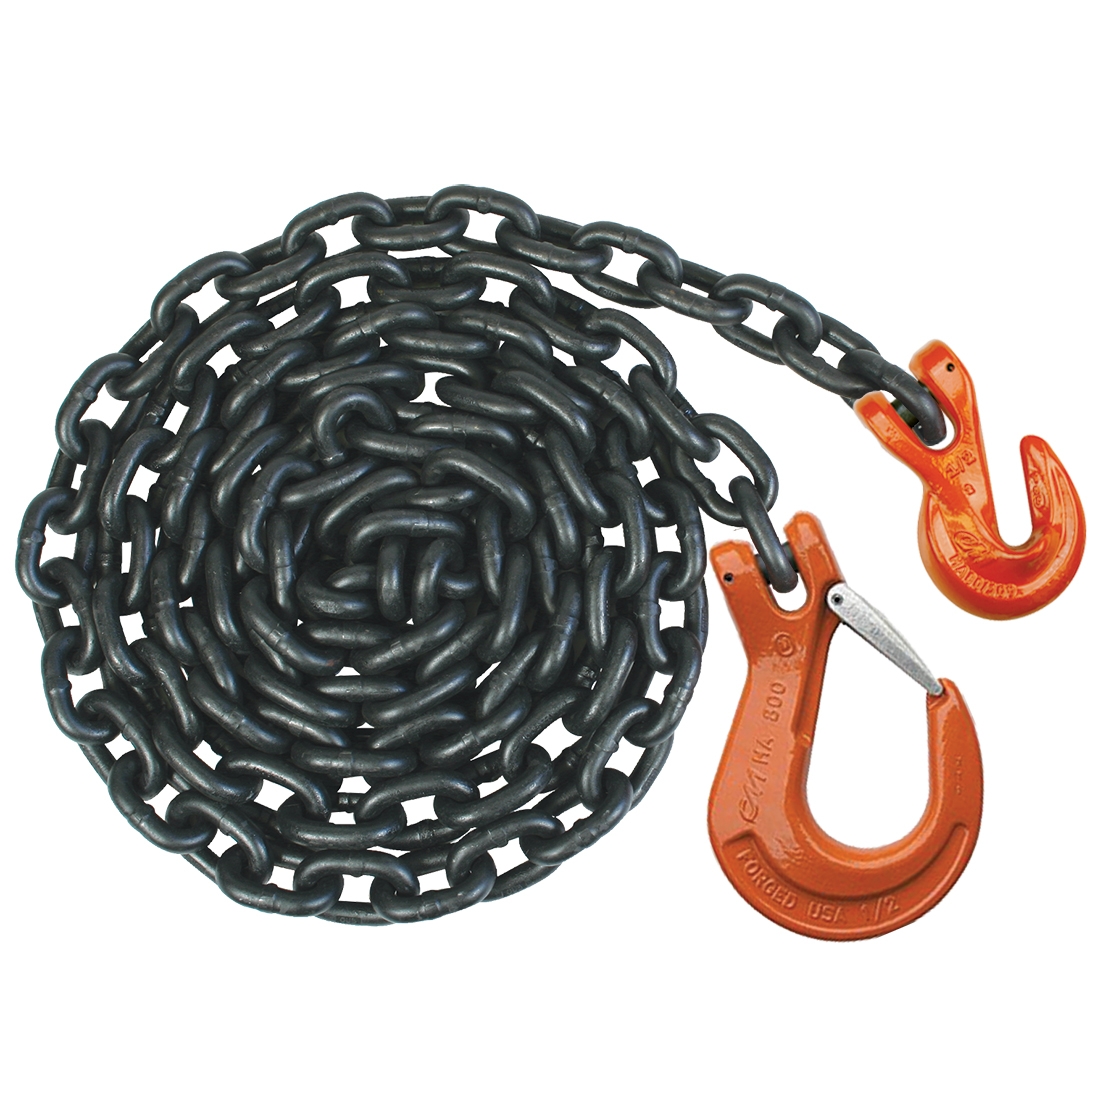 3/8"x26' Tow Chain Tie Down Binder Chain G70 with Safety Grab Hooks Trailer 